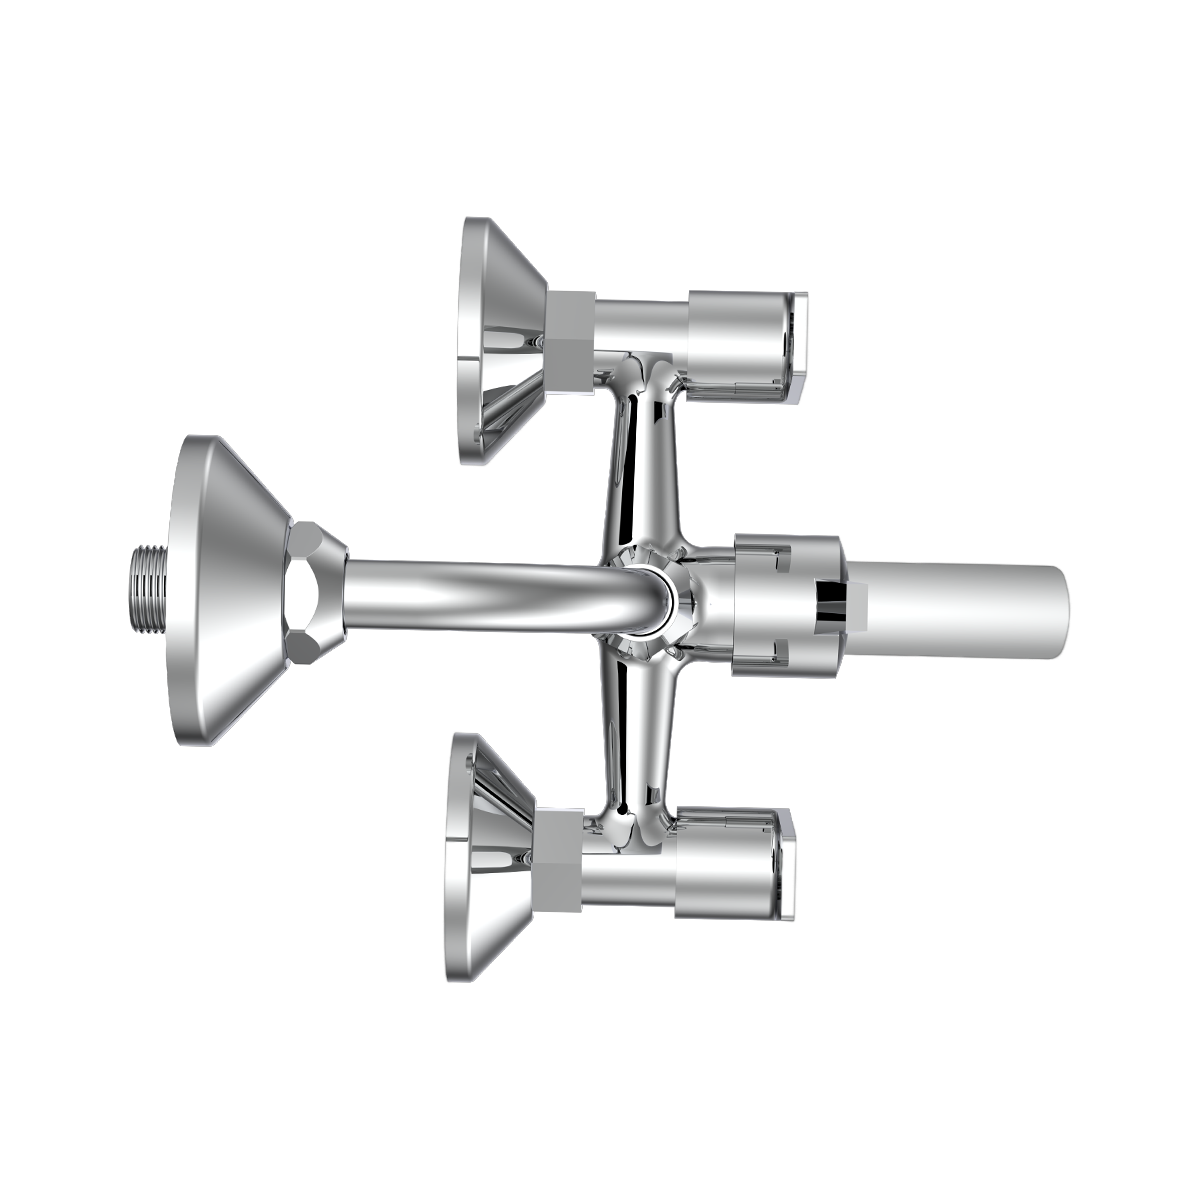 Wall Mixer With Provision Of Overhead Shower With L-Bend